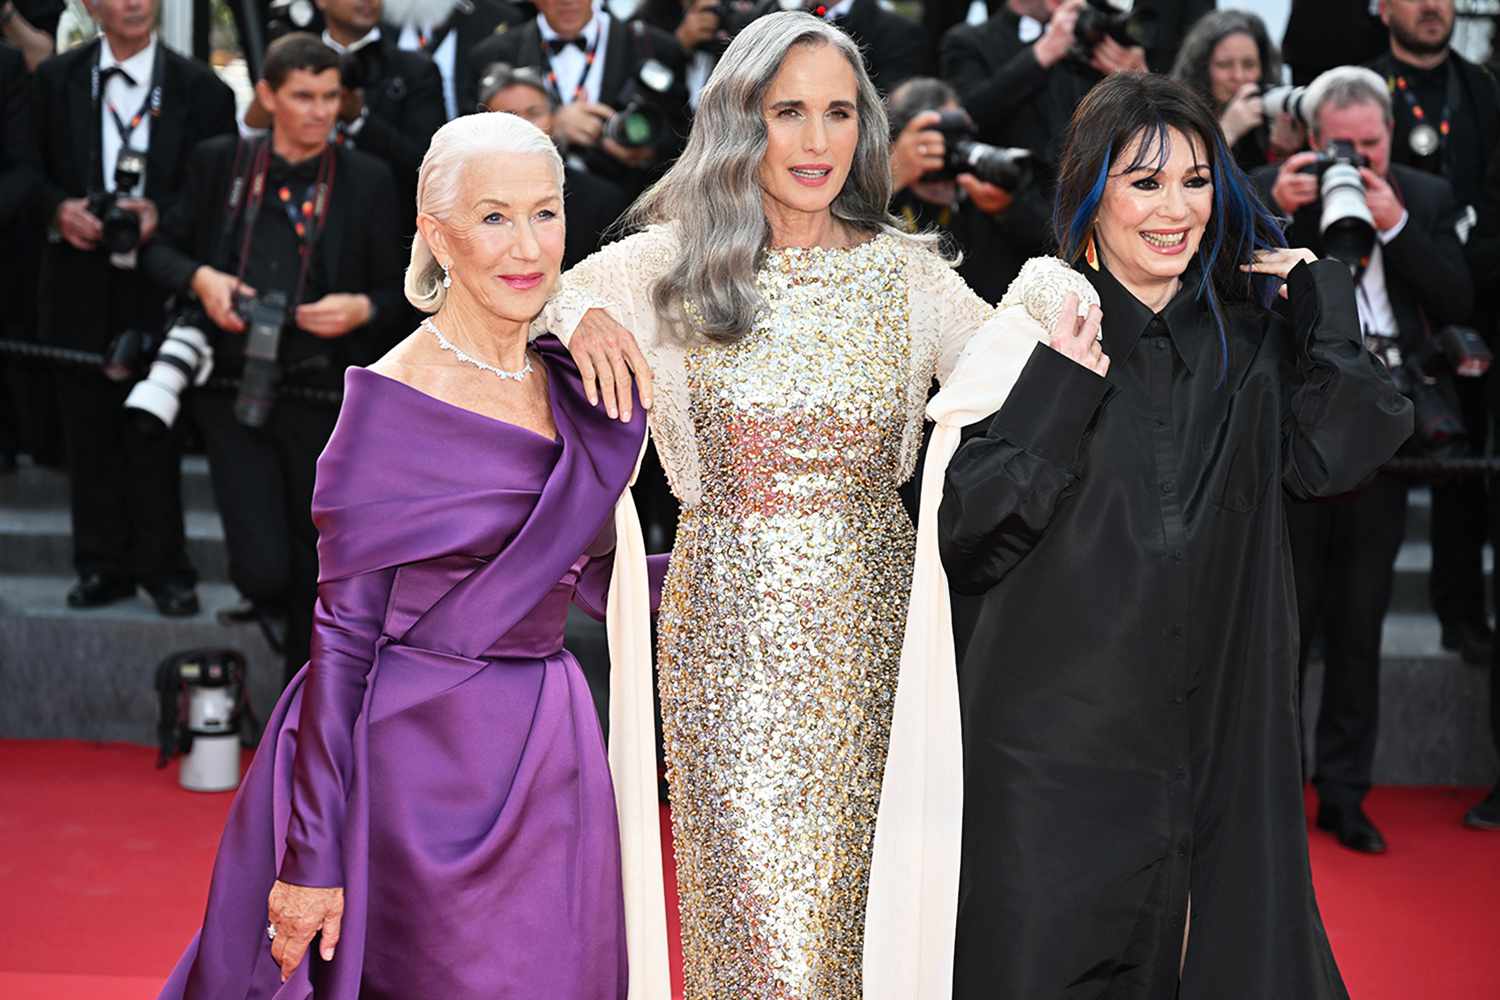 Helen Mirren, Andie Macdowell and Iris Berben arrive at the Red Carpet of the film 'La Plus Precieuse des Marchandises' (The Most Precious of Cargoes) at the 77th edition of the Cannes Film Festival in Cannes, southern France, on May 24, 2024.